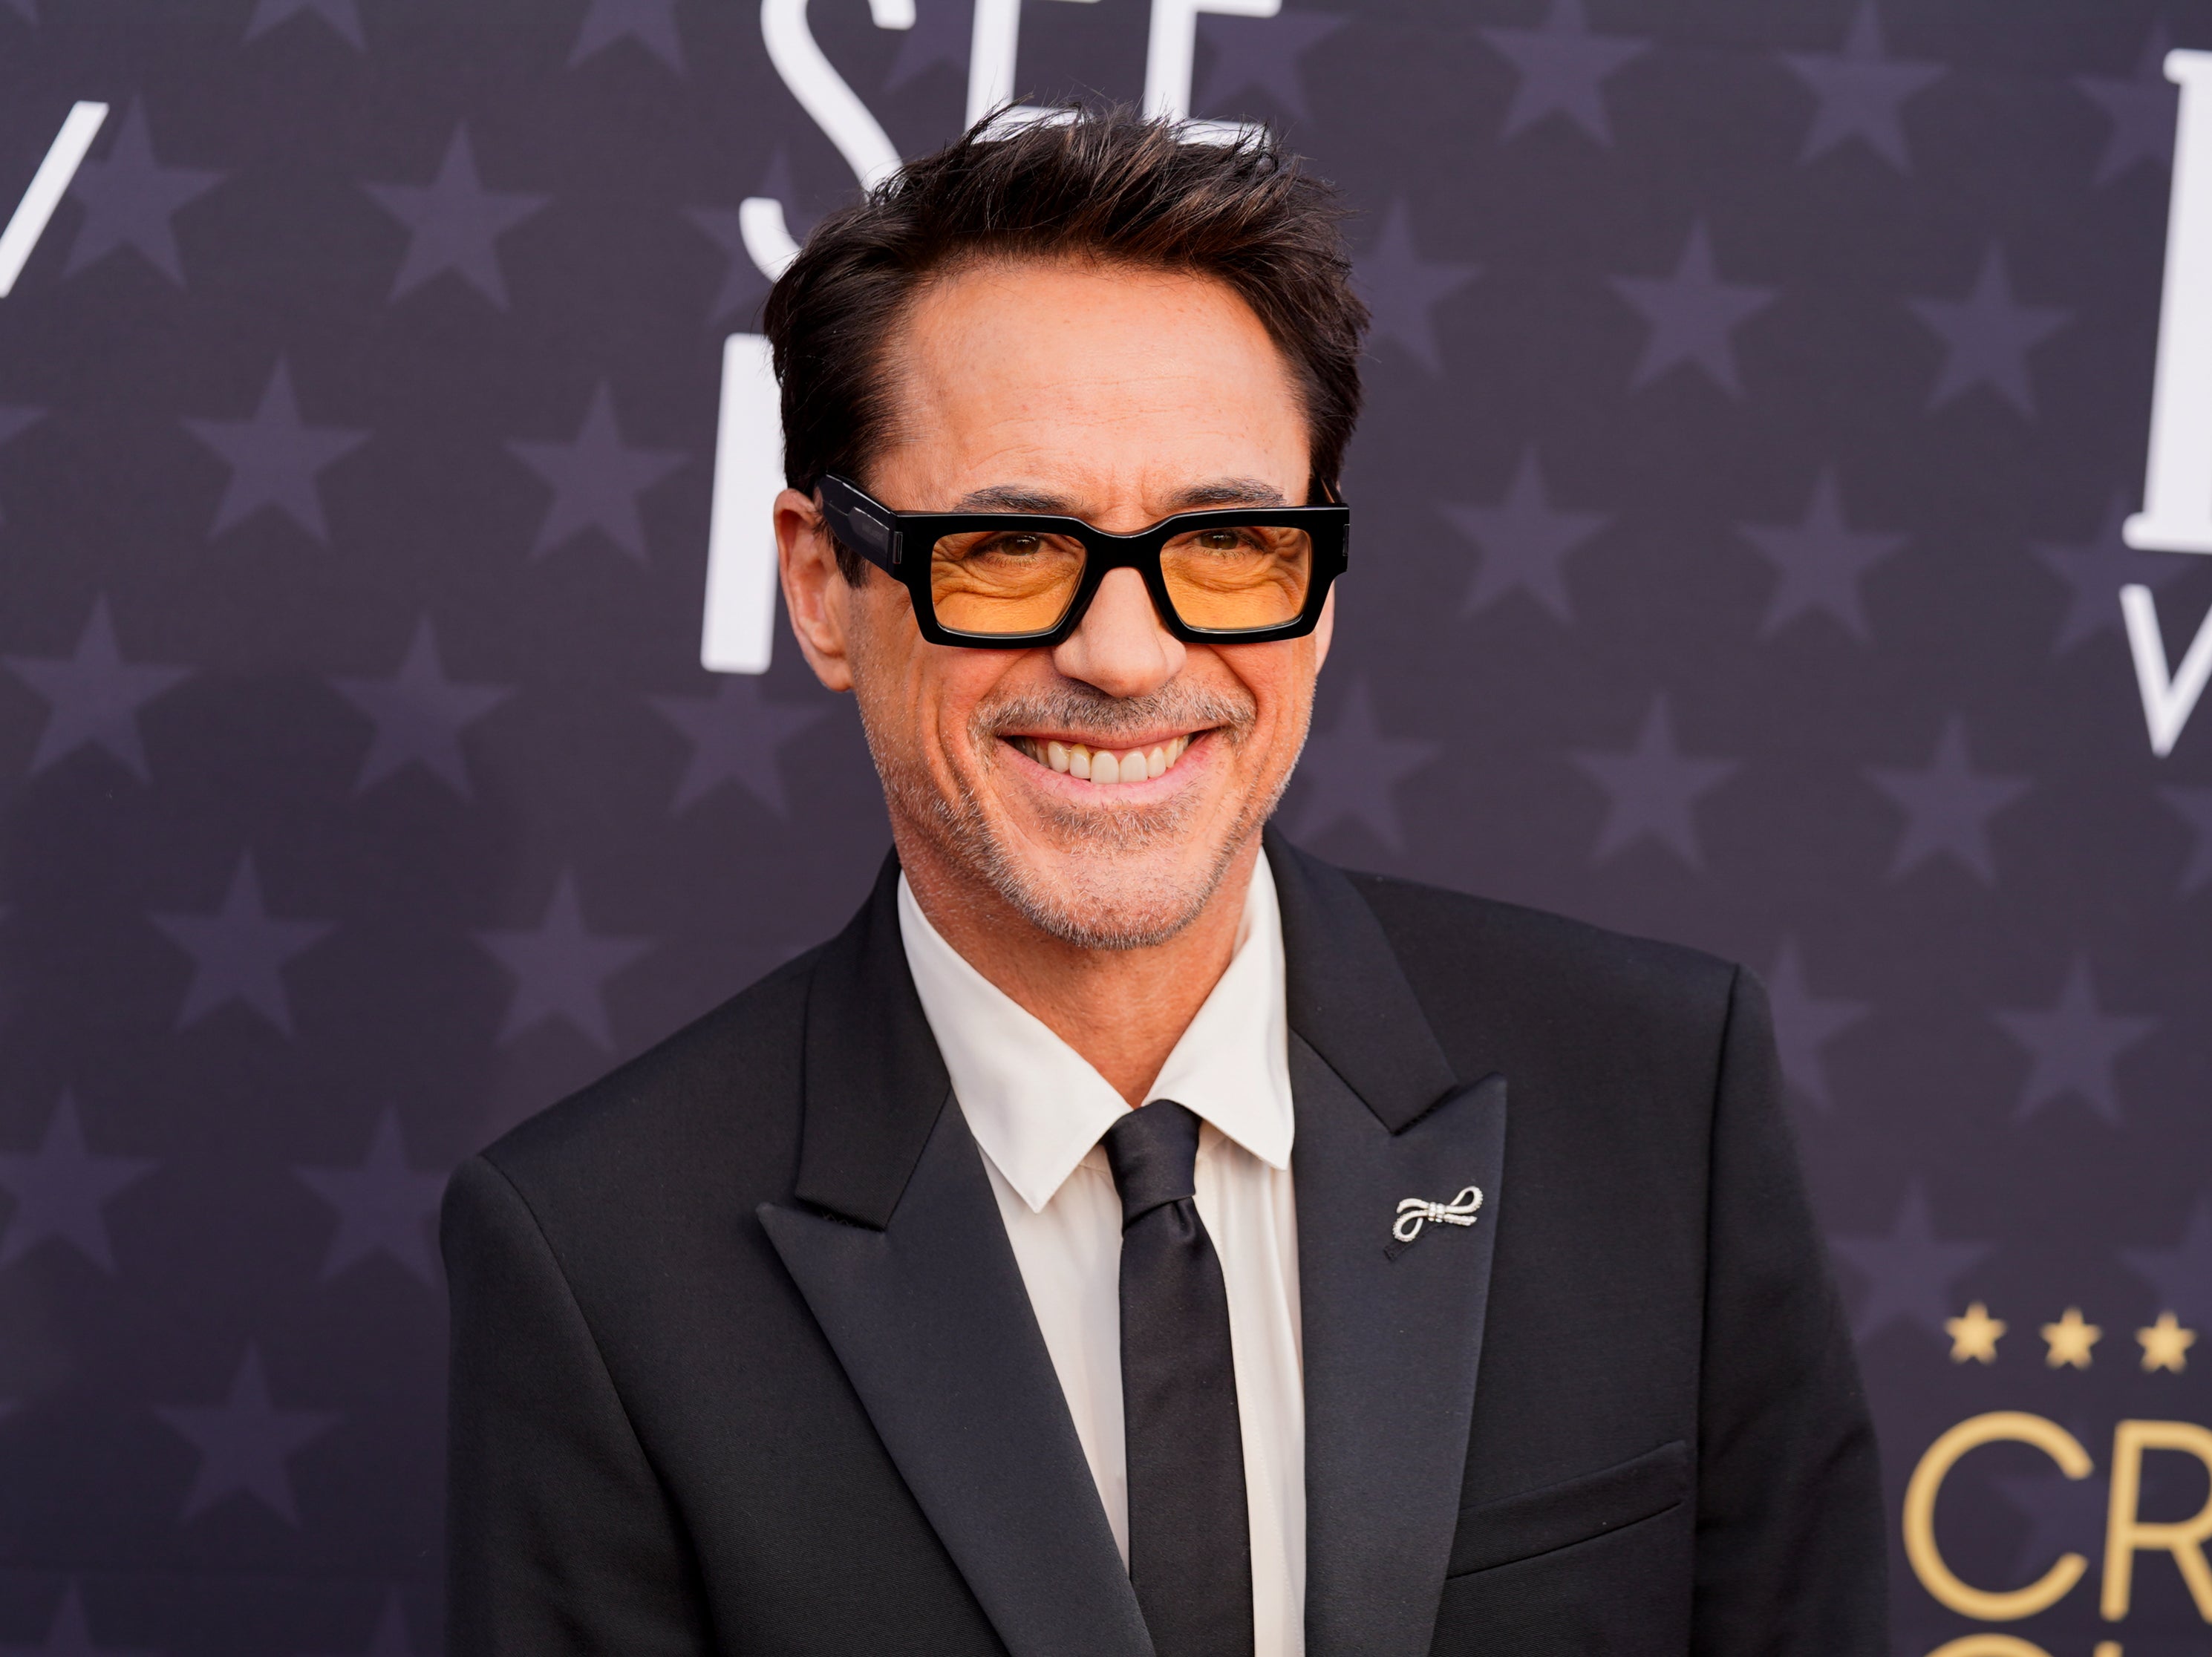 Downey Jr has received three Oscar nominations in his career so far